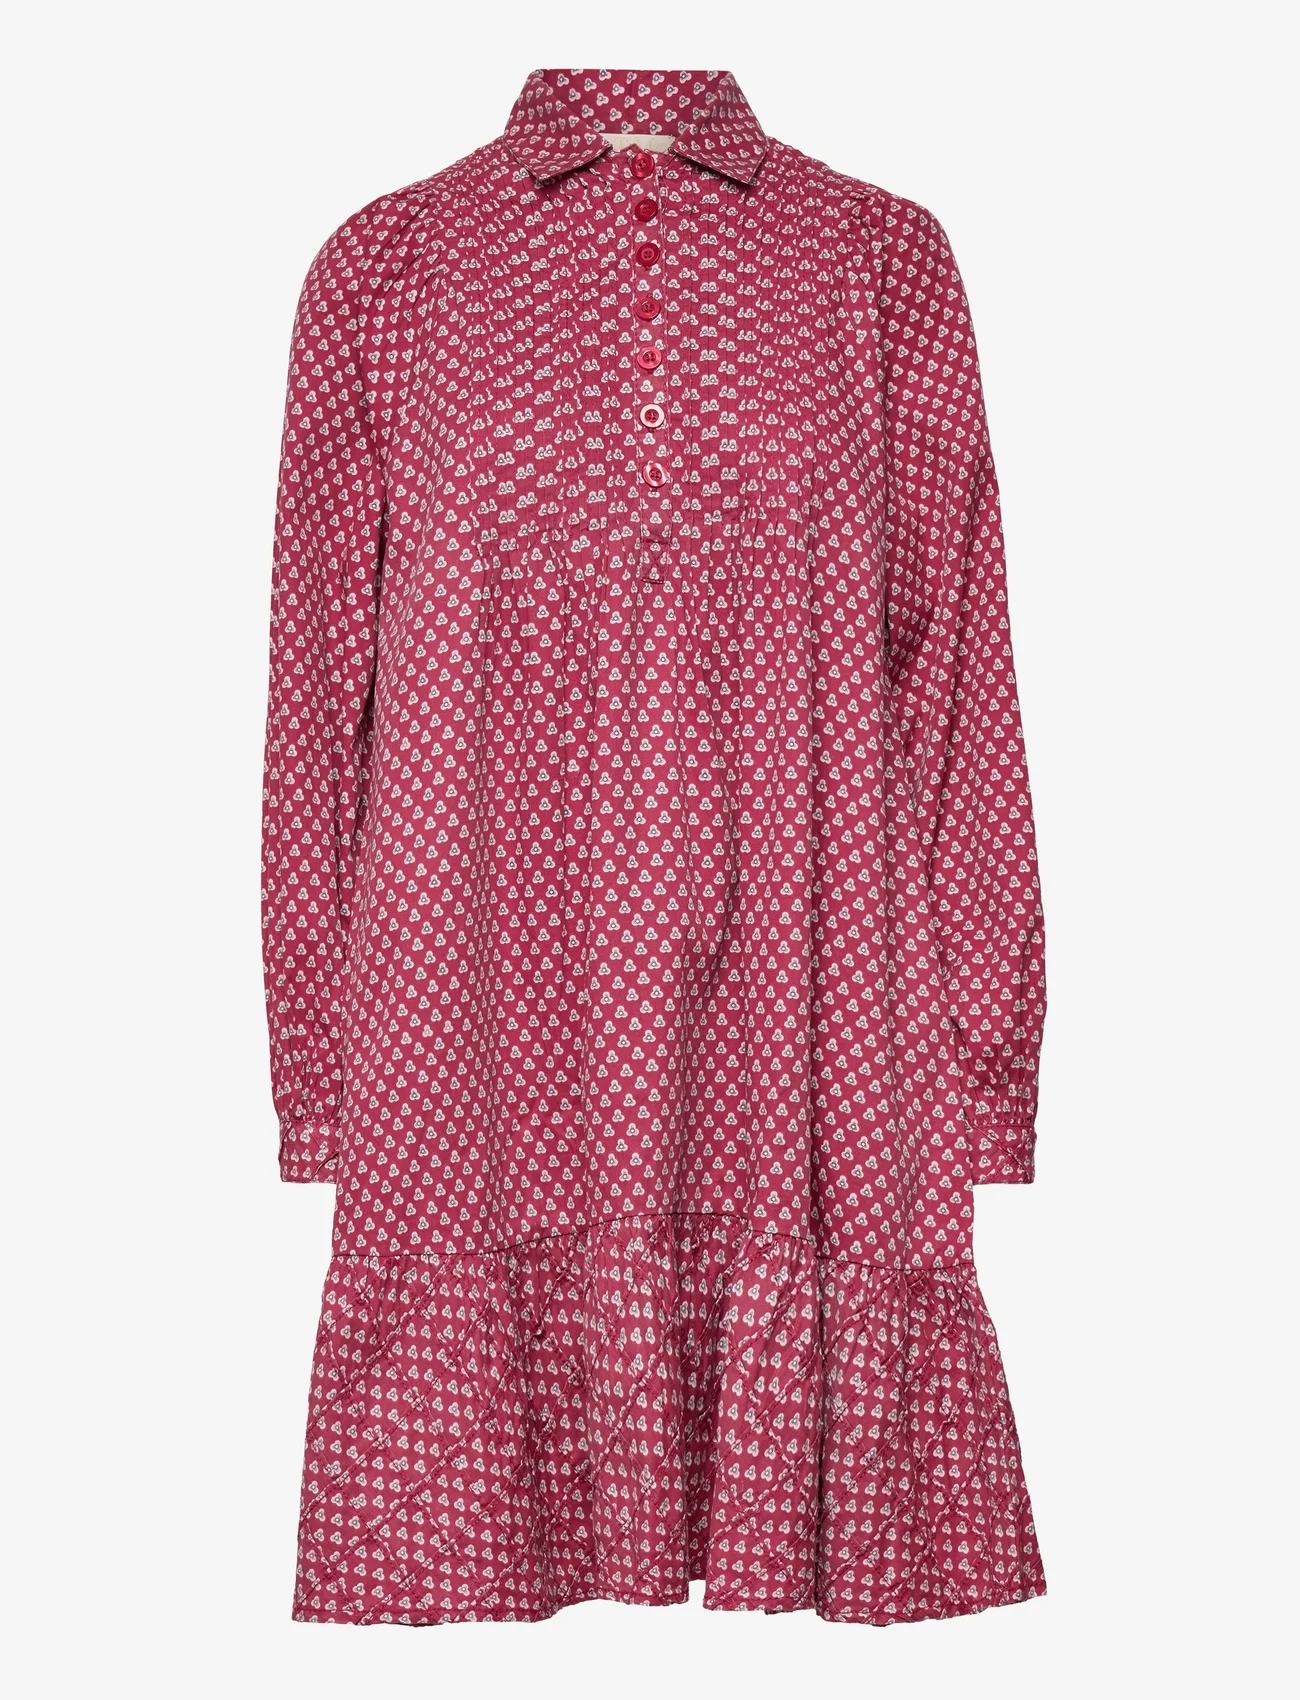 by Ti Mo - Structured Cotton Shift Dress - shirt dresses - floral dots - 0